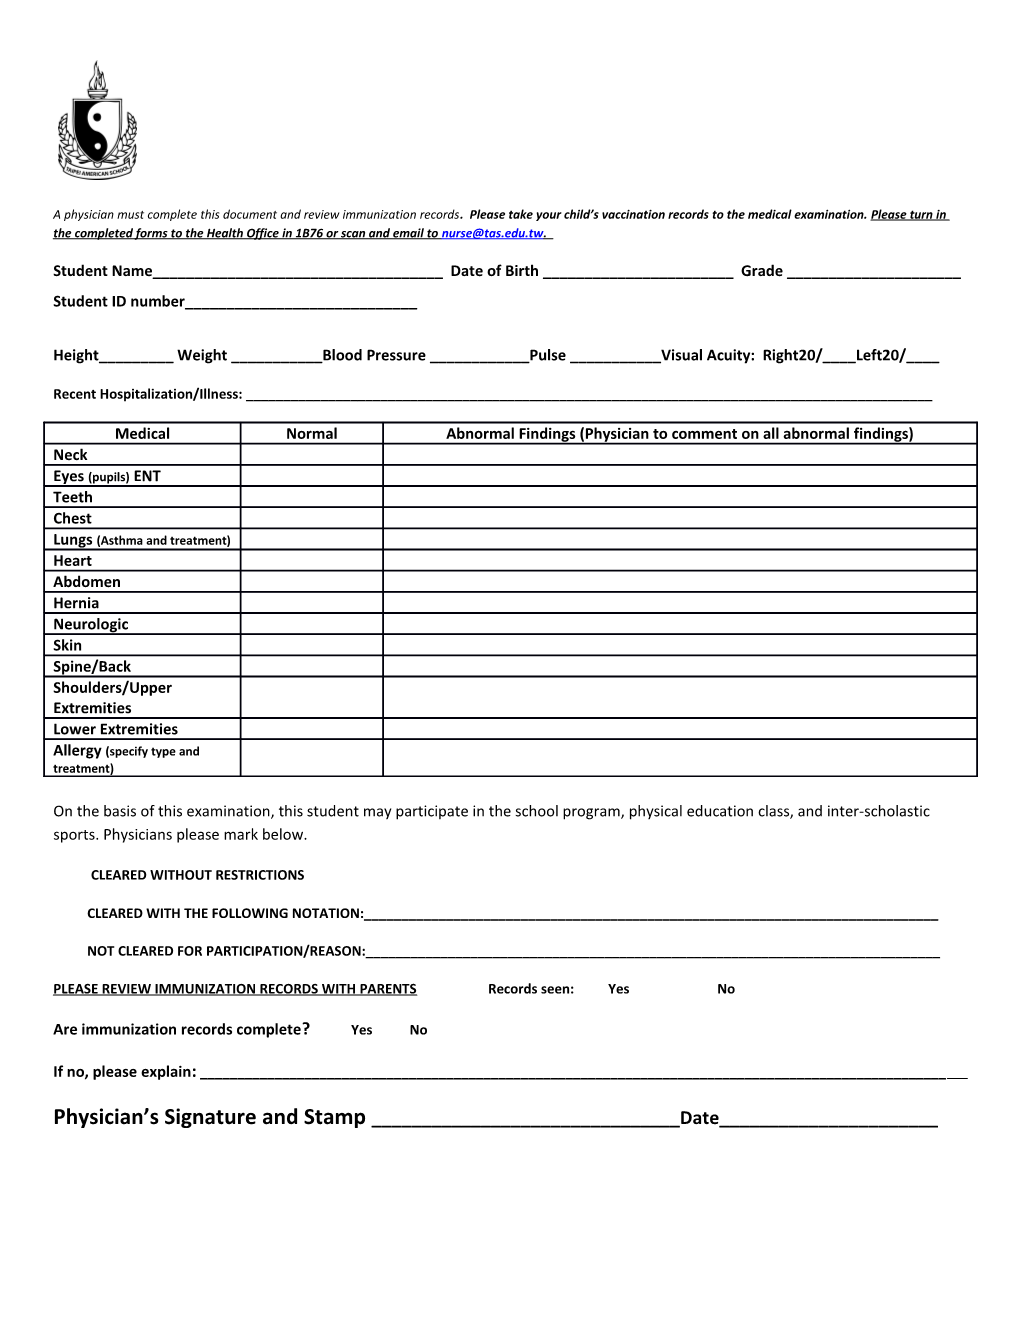 A Physician Must Complete This Document and Review Immunization Records . Please Take